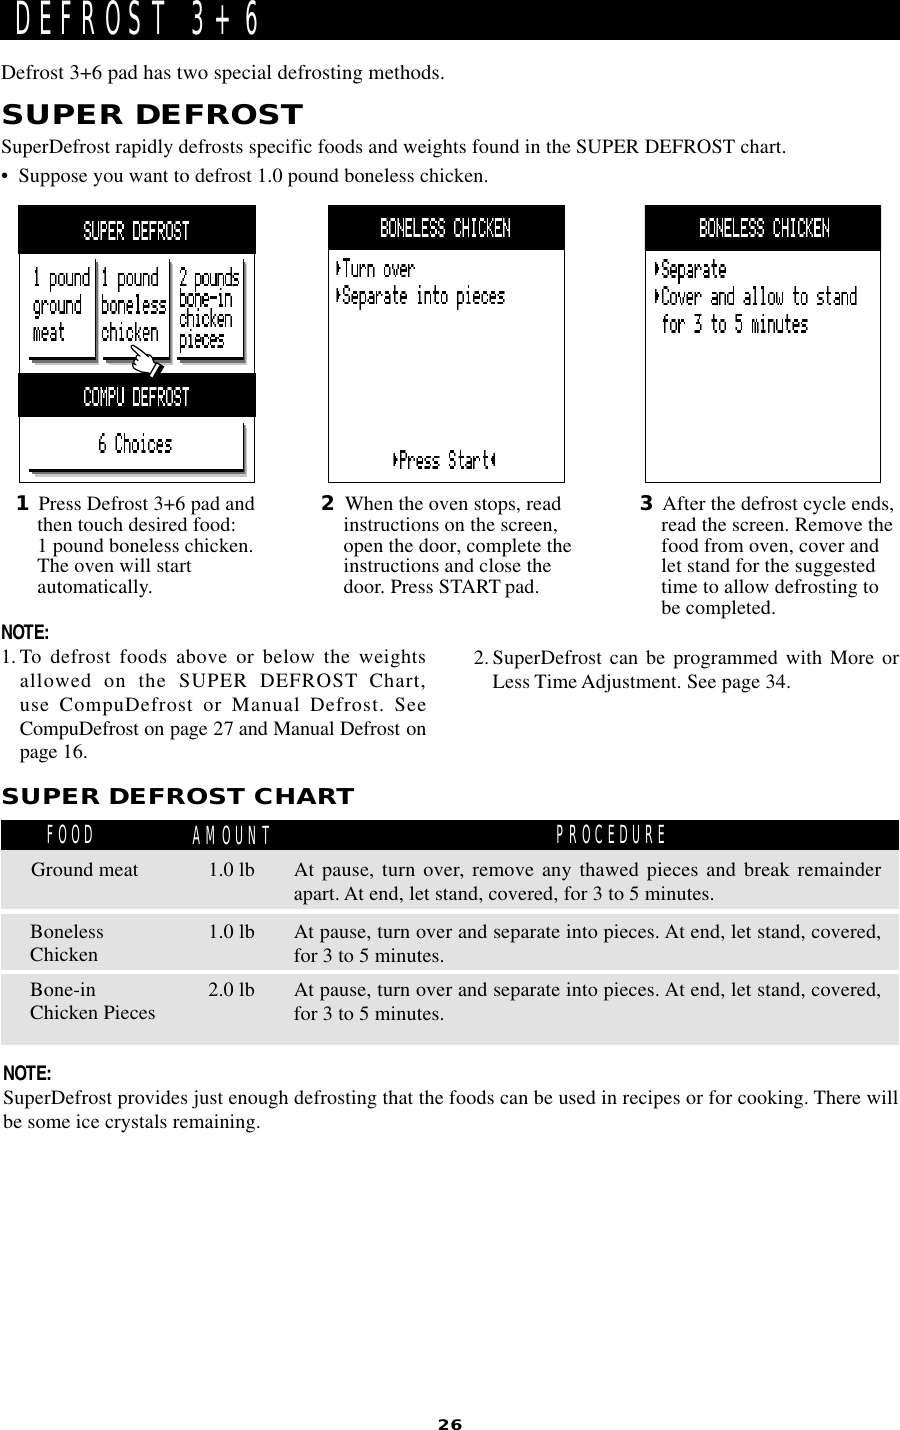 26SUPER DEFROSTSuperDefrost rapidly defrosts specific foods and weights found in the SUPER DEFROST chart.•  Suppose you want to defrost 1.0 pound boneless chicken.Defrost 3+6 pad has two special defrosting methods.DEFROST 3+6NOTE:1. To defrost foods above or below the weightsallowed on the SUPER DEFROST Chart,use CompuDefrost or Manual Defrost. SeeCompuDefrost on page 27 and Manual Defrost onpage 16.2. SuperDefrost can be programmed with More orLess Time Adjustment. See page 34.FOOD AMOUNTSUPER DEFROST CHARTPROCEDUREAt pause, turn over, remove any thawed pieces and break remainderapart. At end, let stand, covered, for 3 to 5 minutes.Ground meat 1.0 lbAt pause, turn over and separate into pieces. At end, let stand, covered,for 3 to 5 minutes.BonelessChicken 1.0 lbAt pause, turn over and separate into pieces. At end, let stand, covered,for 3 to 5 minutes.Bone-inChicken Pieces 2.0 lbNOTE:SuperDefrost provides just enough defrosting that the foods can be used in recipes or for cooking. There willbe some ice crystals remaining.1Press Defrost 3+6 pad andthen touch desired food:1 pound boneless chicken.The oven will startautomatically.2When the oven stops, readinstructions on the screen,open the door, complete theinstructions and close thedoor. Press START pad.3After the defrost cycle ends,read the screen. Remove thefood from oven, cover andlet stand for the suggestedtime to allow defrosting tobe completed.